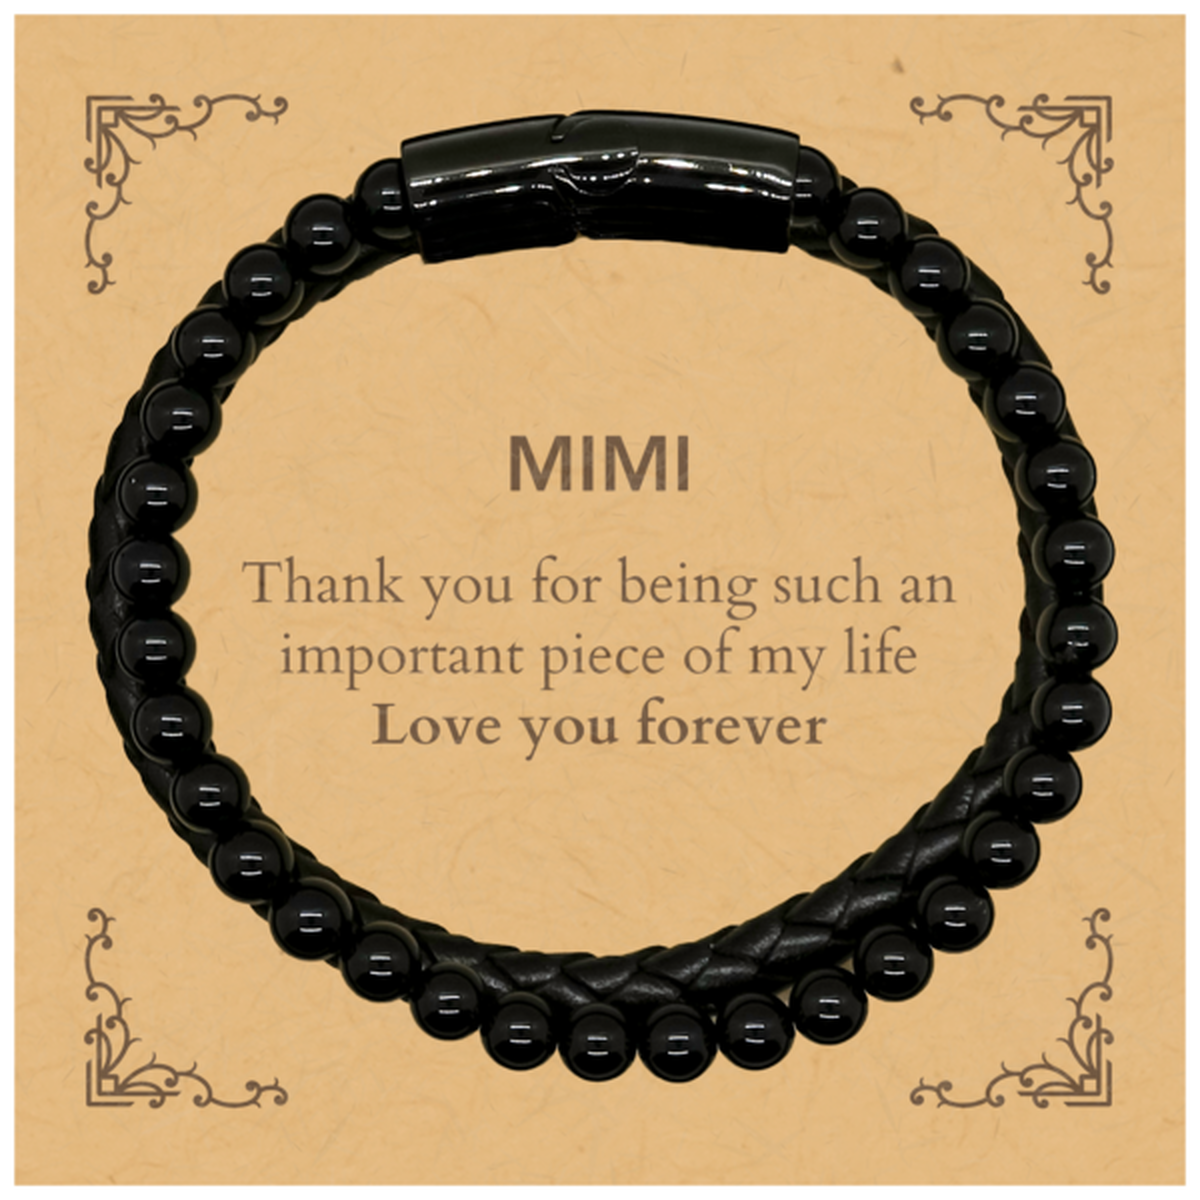 Appropriate Mimi Stone Leather Bracelets Epic Birthday Gifts for Mimi Thank you for being such an important piece of my life Mimi Christmas Mothers Fathers Day